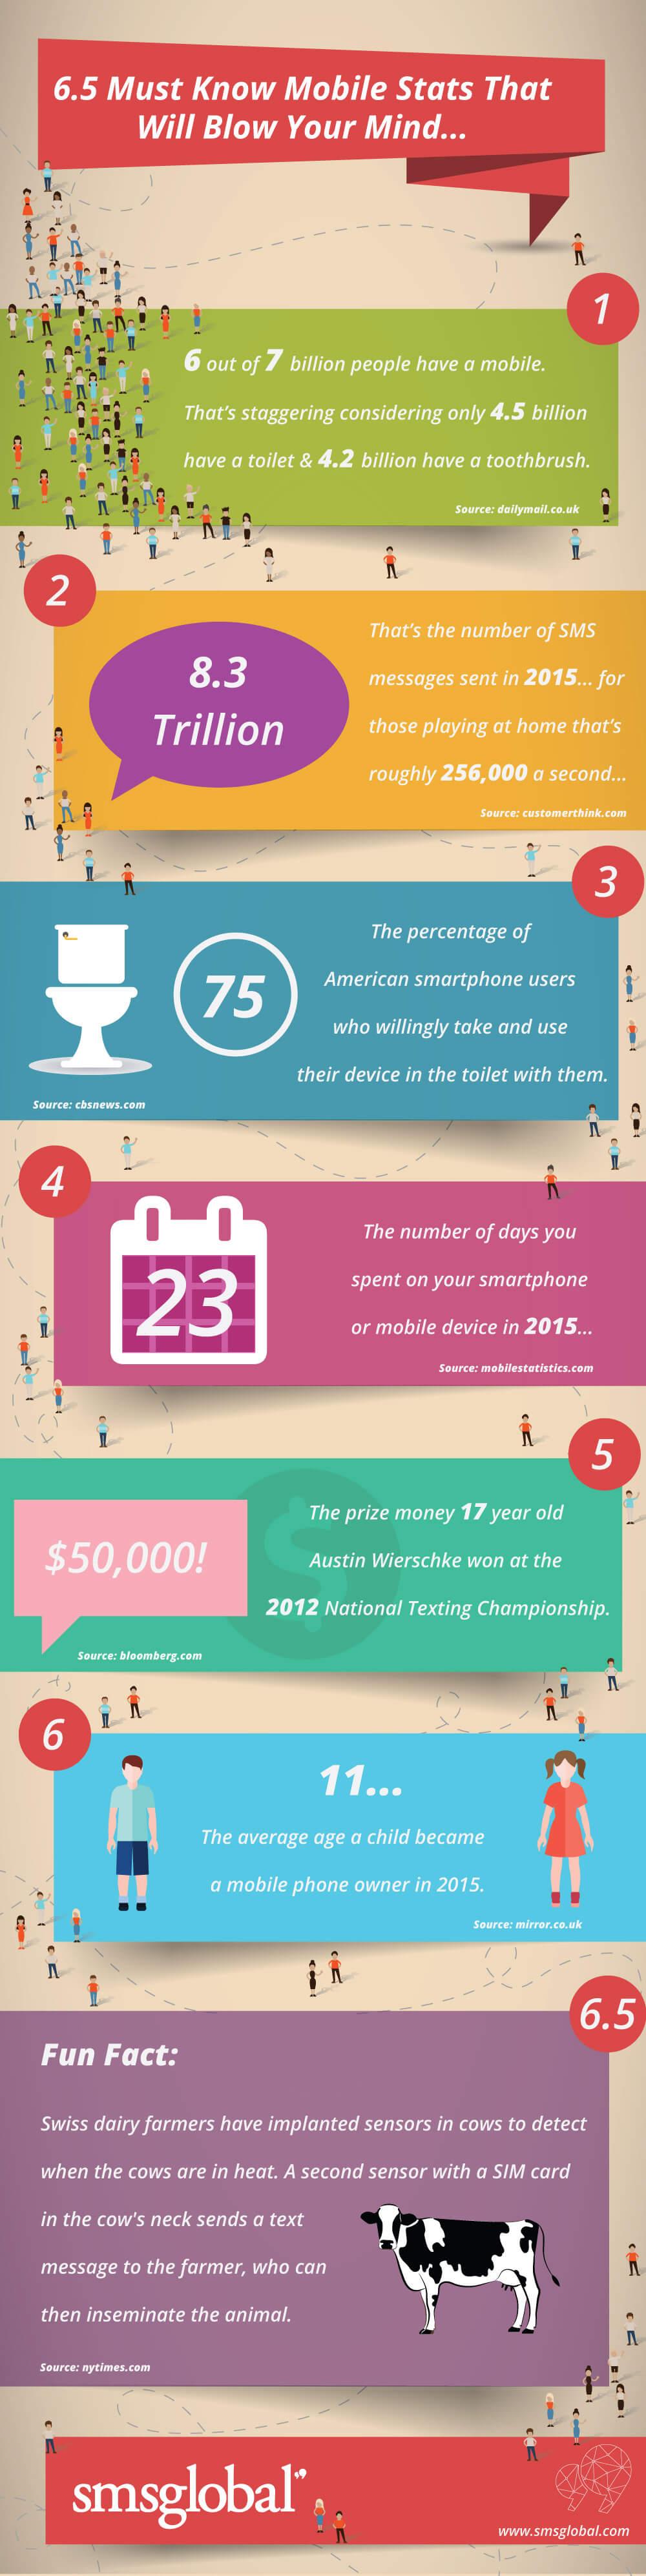 Infographic: 6.5 Must Know Mobile Statistics That Will Blow Your Mind